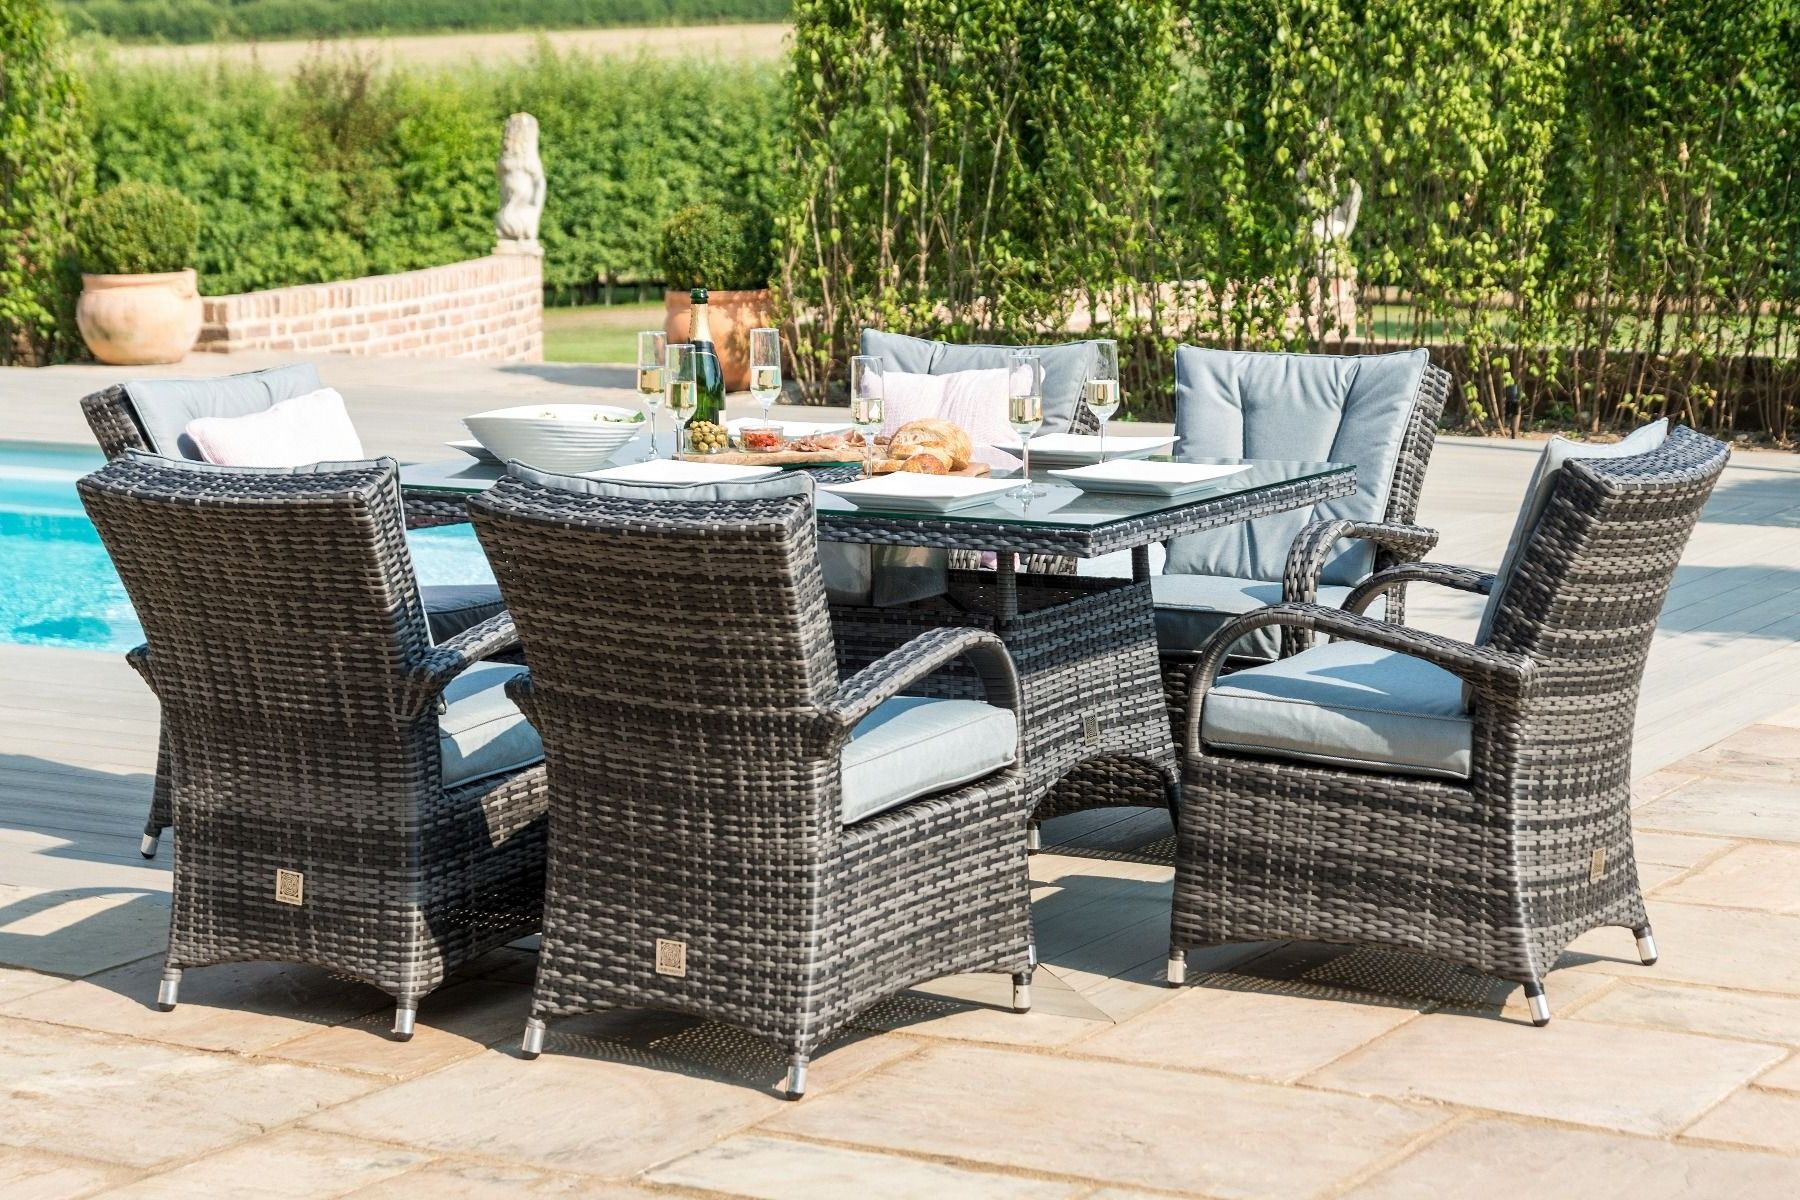 Gray Wicker Rectangular Patio Dining Sets In Favorite Maze Rattan Texas 6 Seat Rectangle Dining Set – Grey (View 3 of 15)